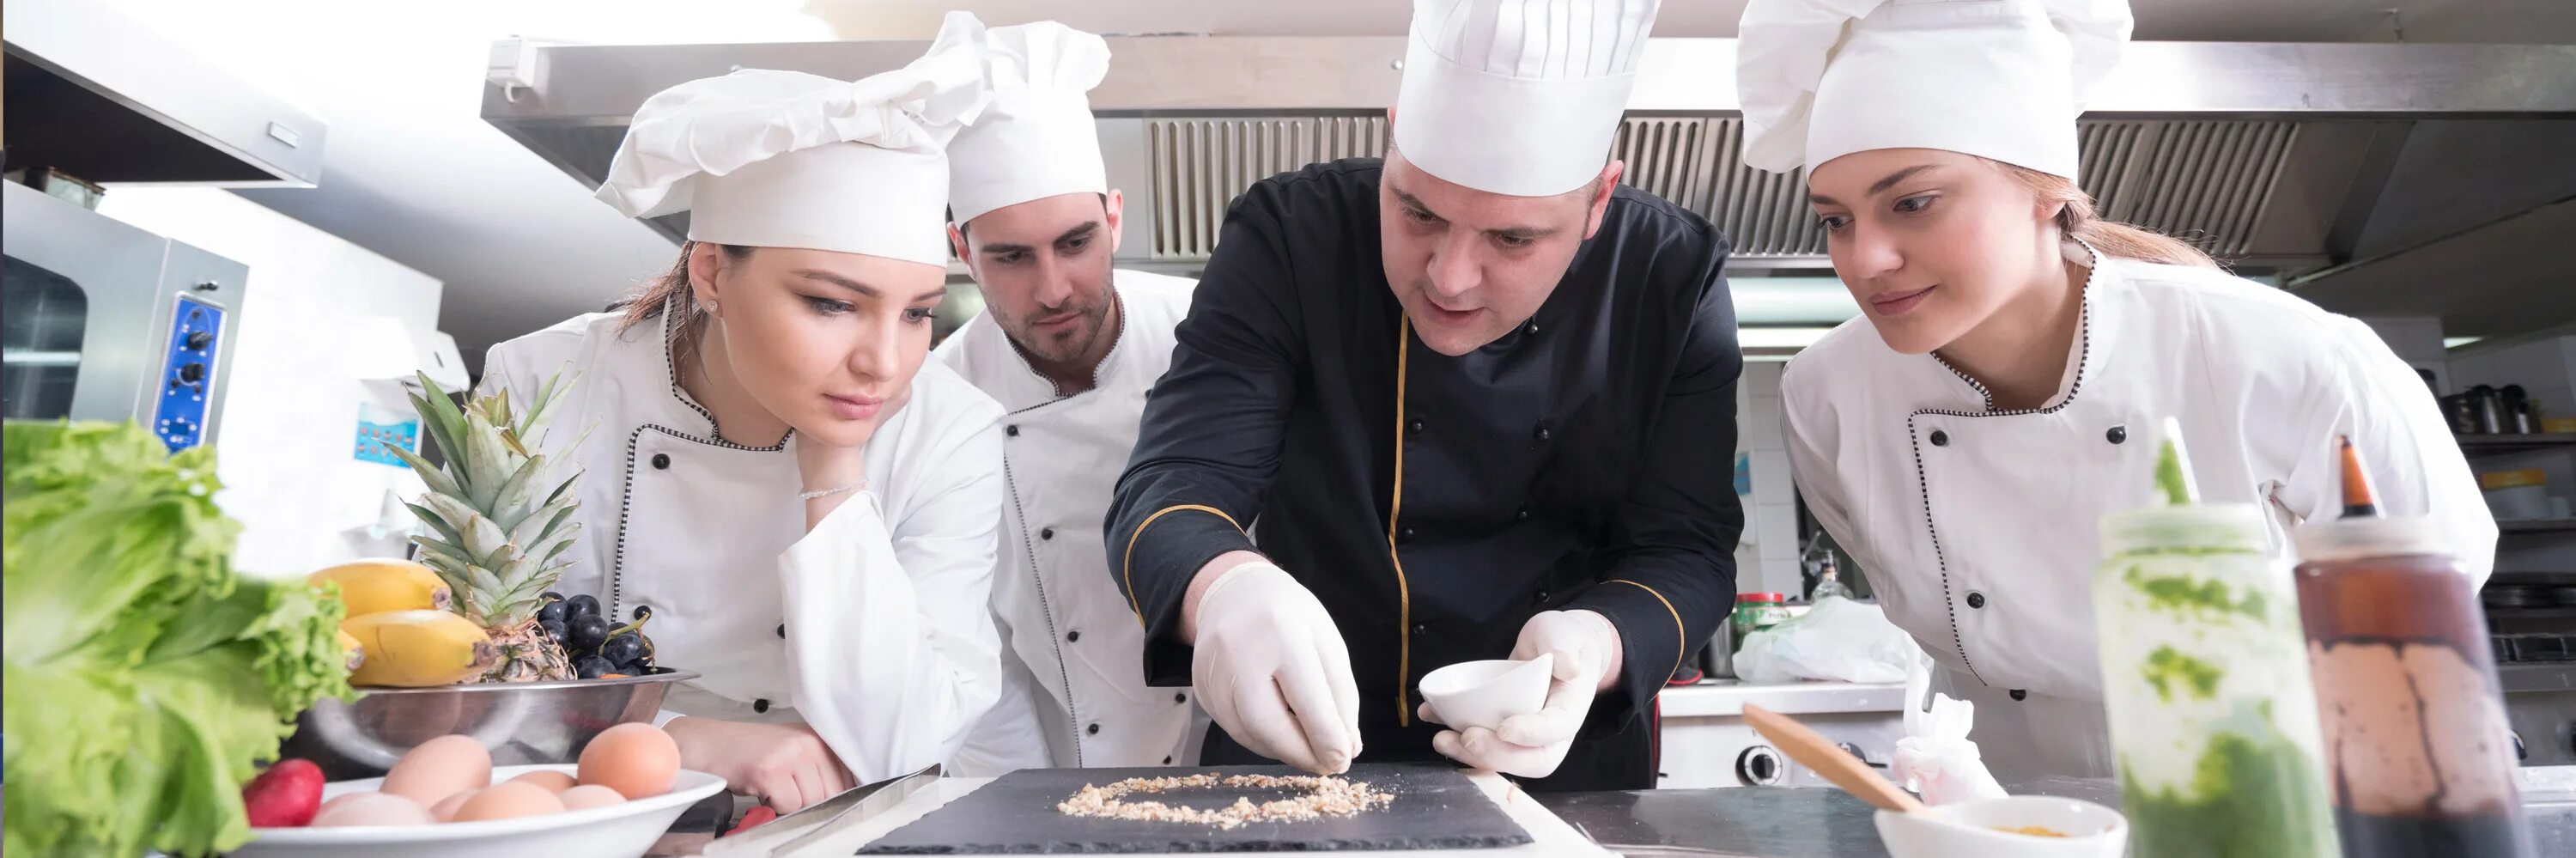 Commis Chef кто это. Cooking courses. Prep Cooks, Assistants and Apprentices s.